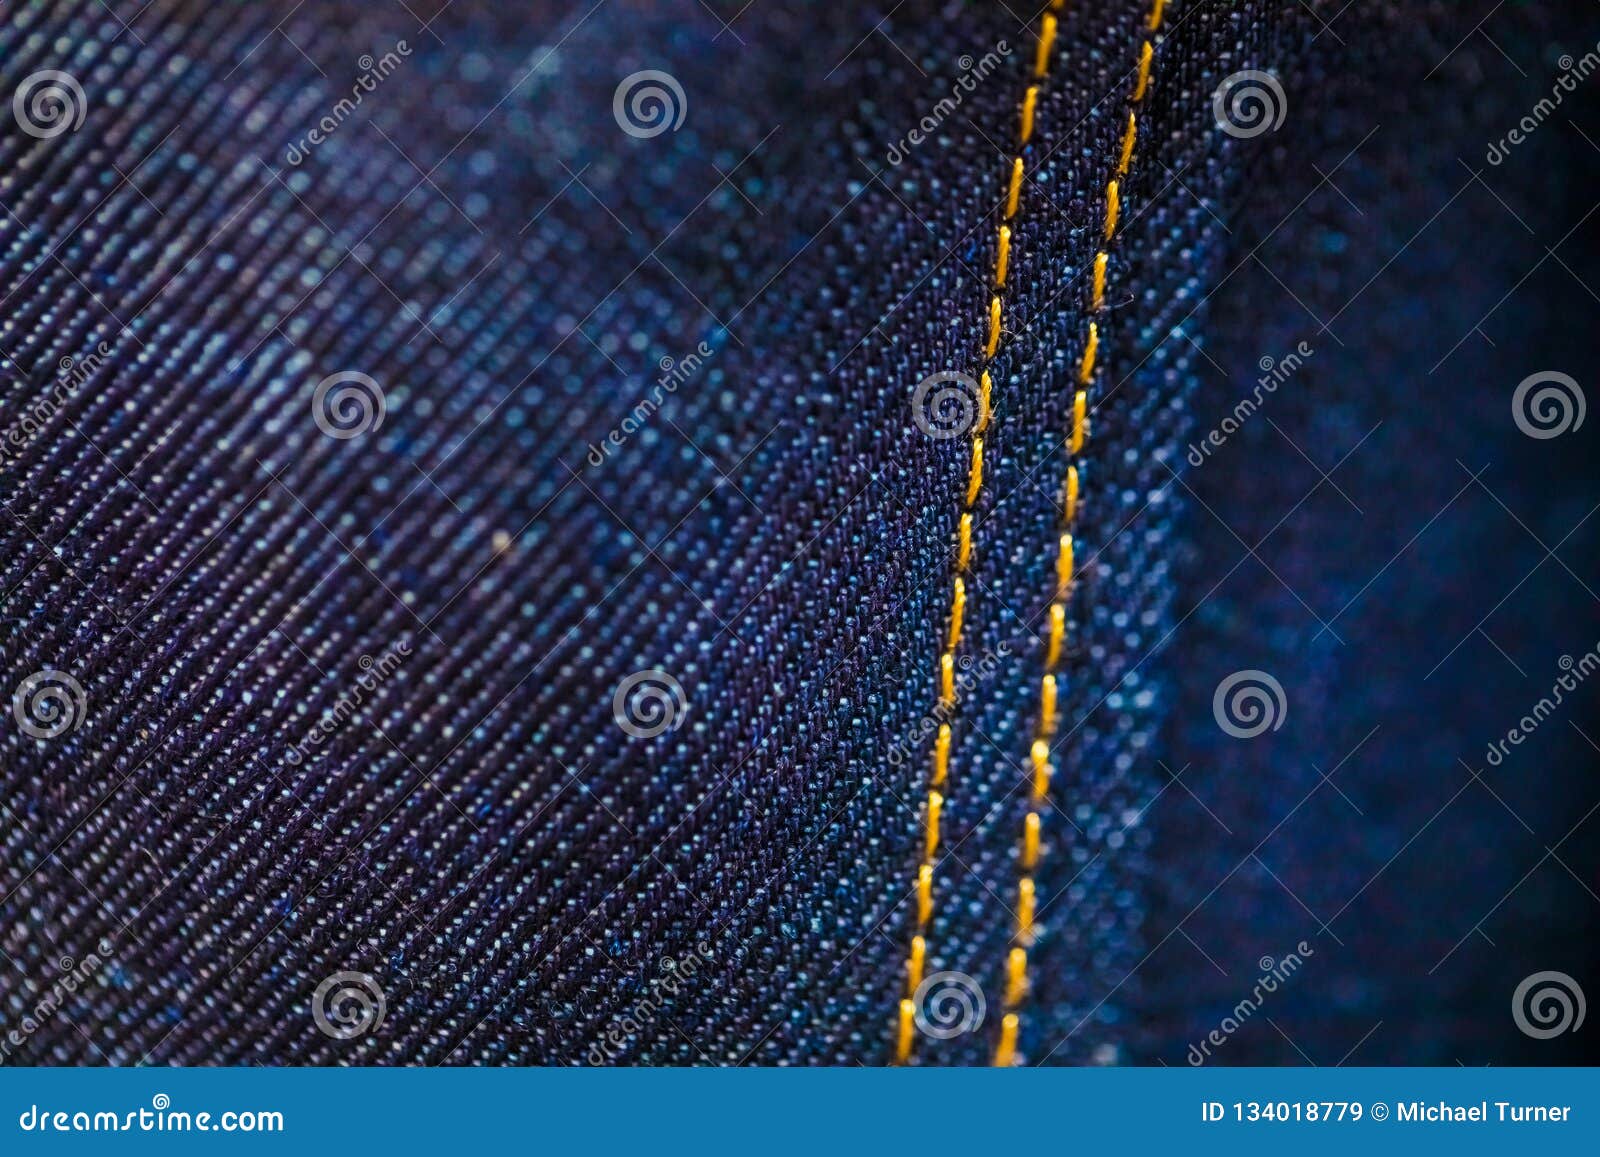 Blue and Yellow Denim with Stitching Stock Image - Image of fabric ...